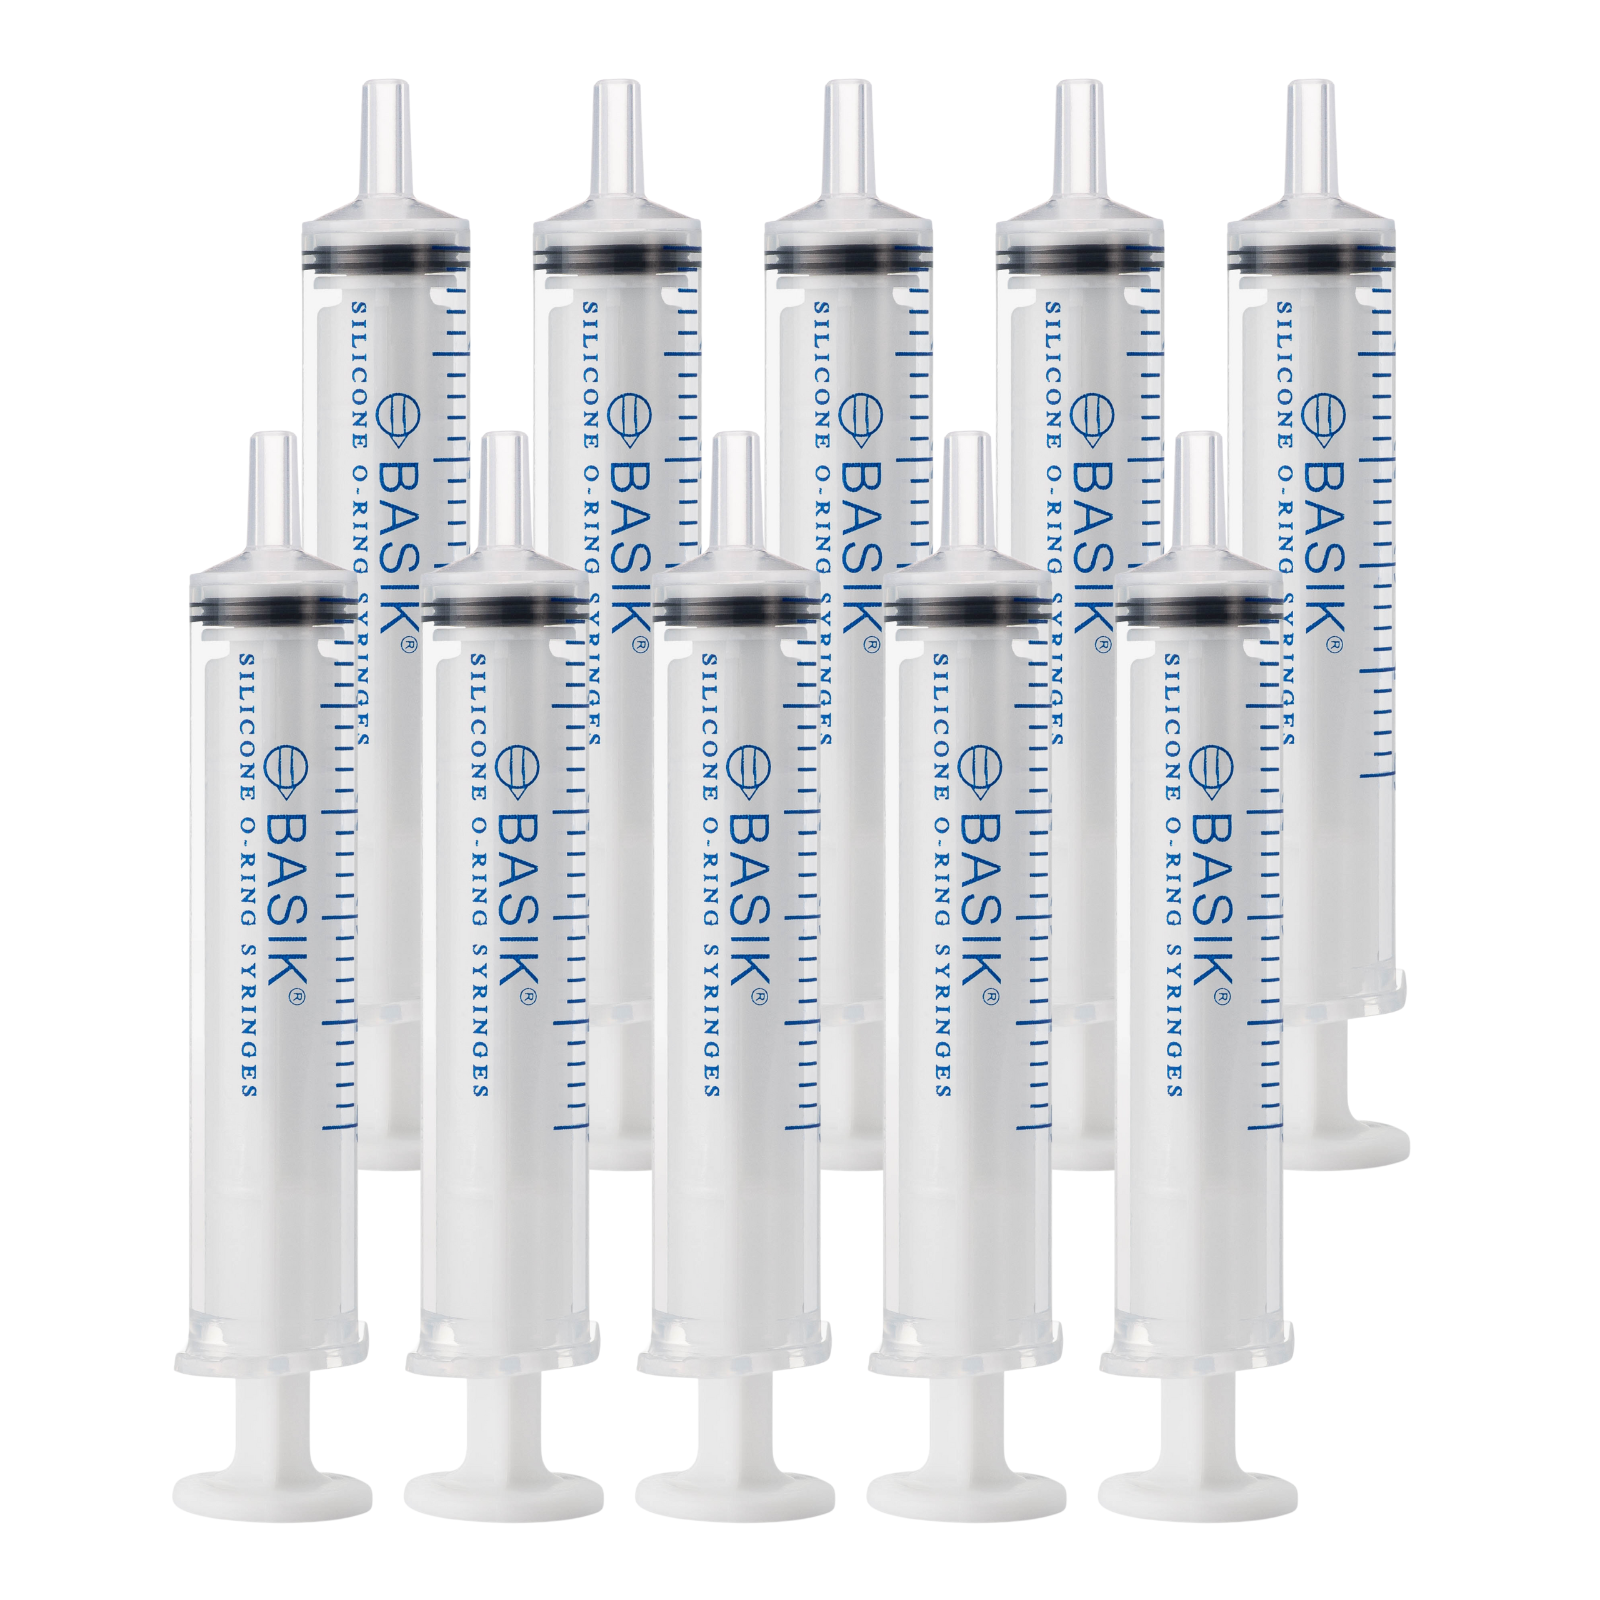 5cc | 5ml Silicone O-ring Slip Tip Feeding  Craft Syringe With Caps  10/pack Medcare Products 5cc Slip Tip